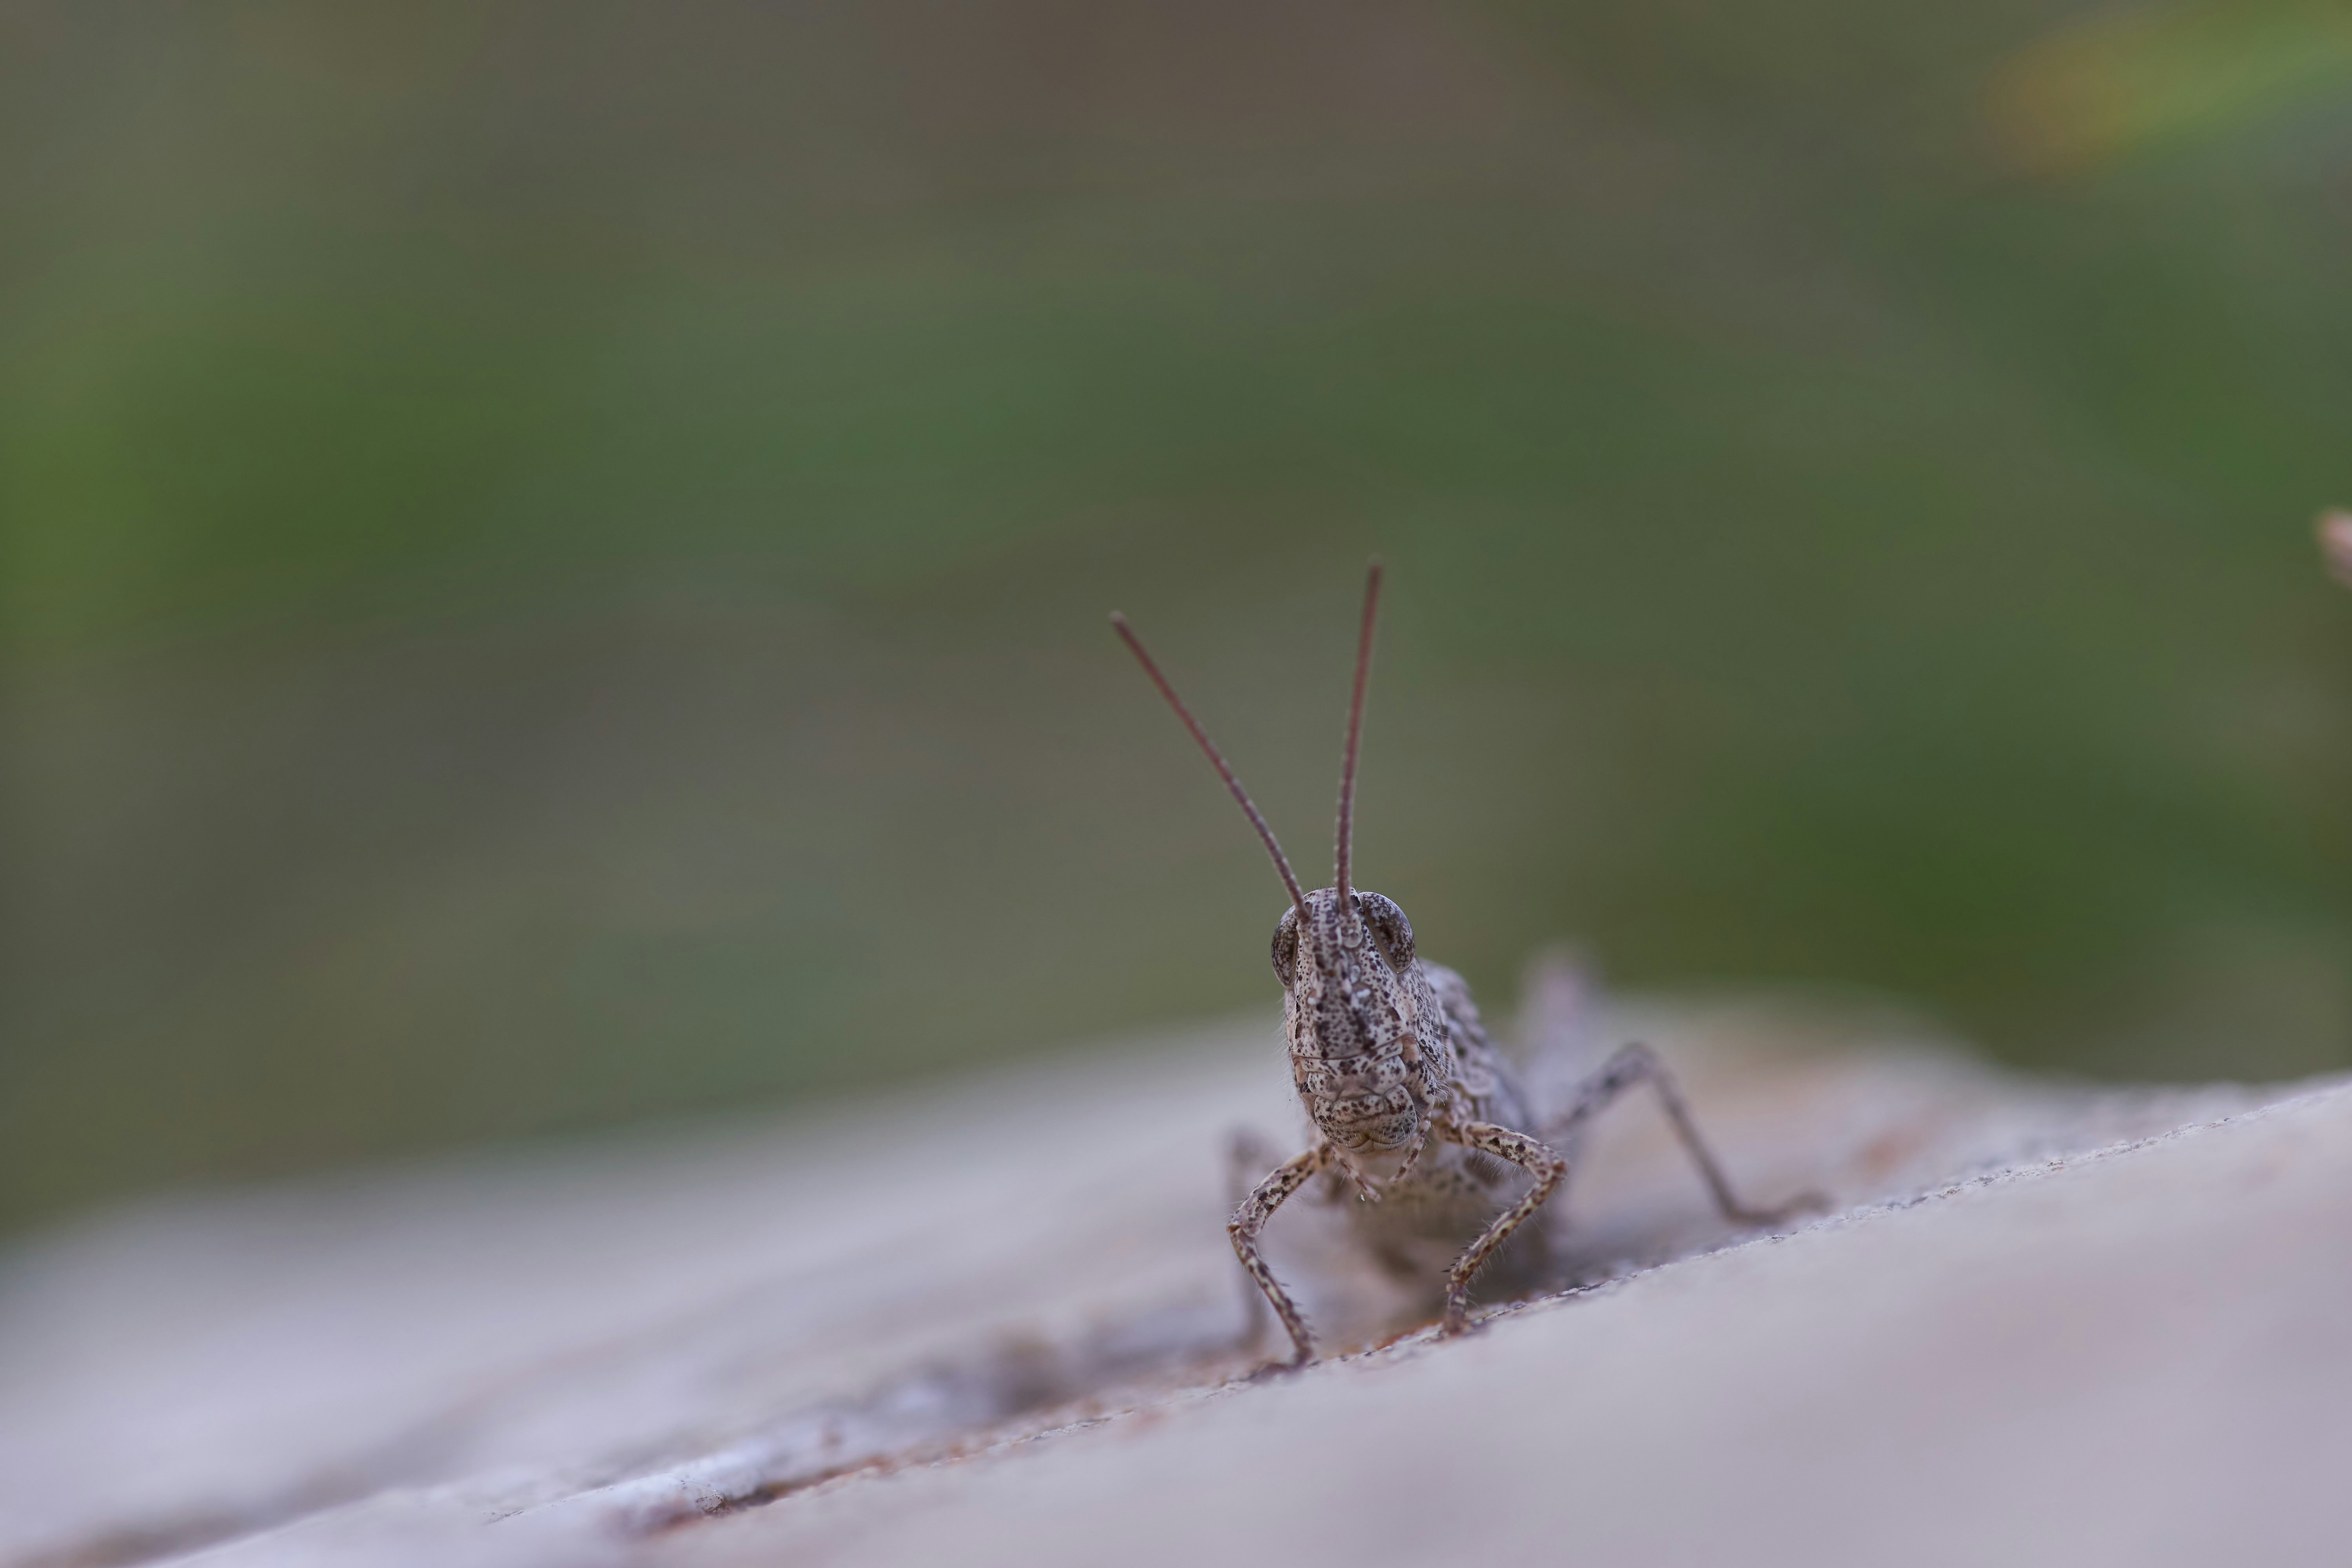 brown grasshopper on white surface in close up photography during daytime